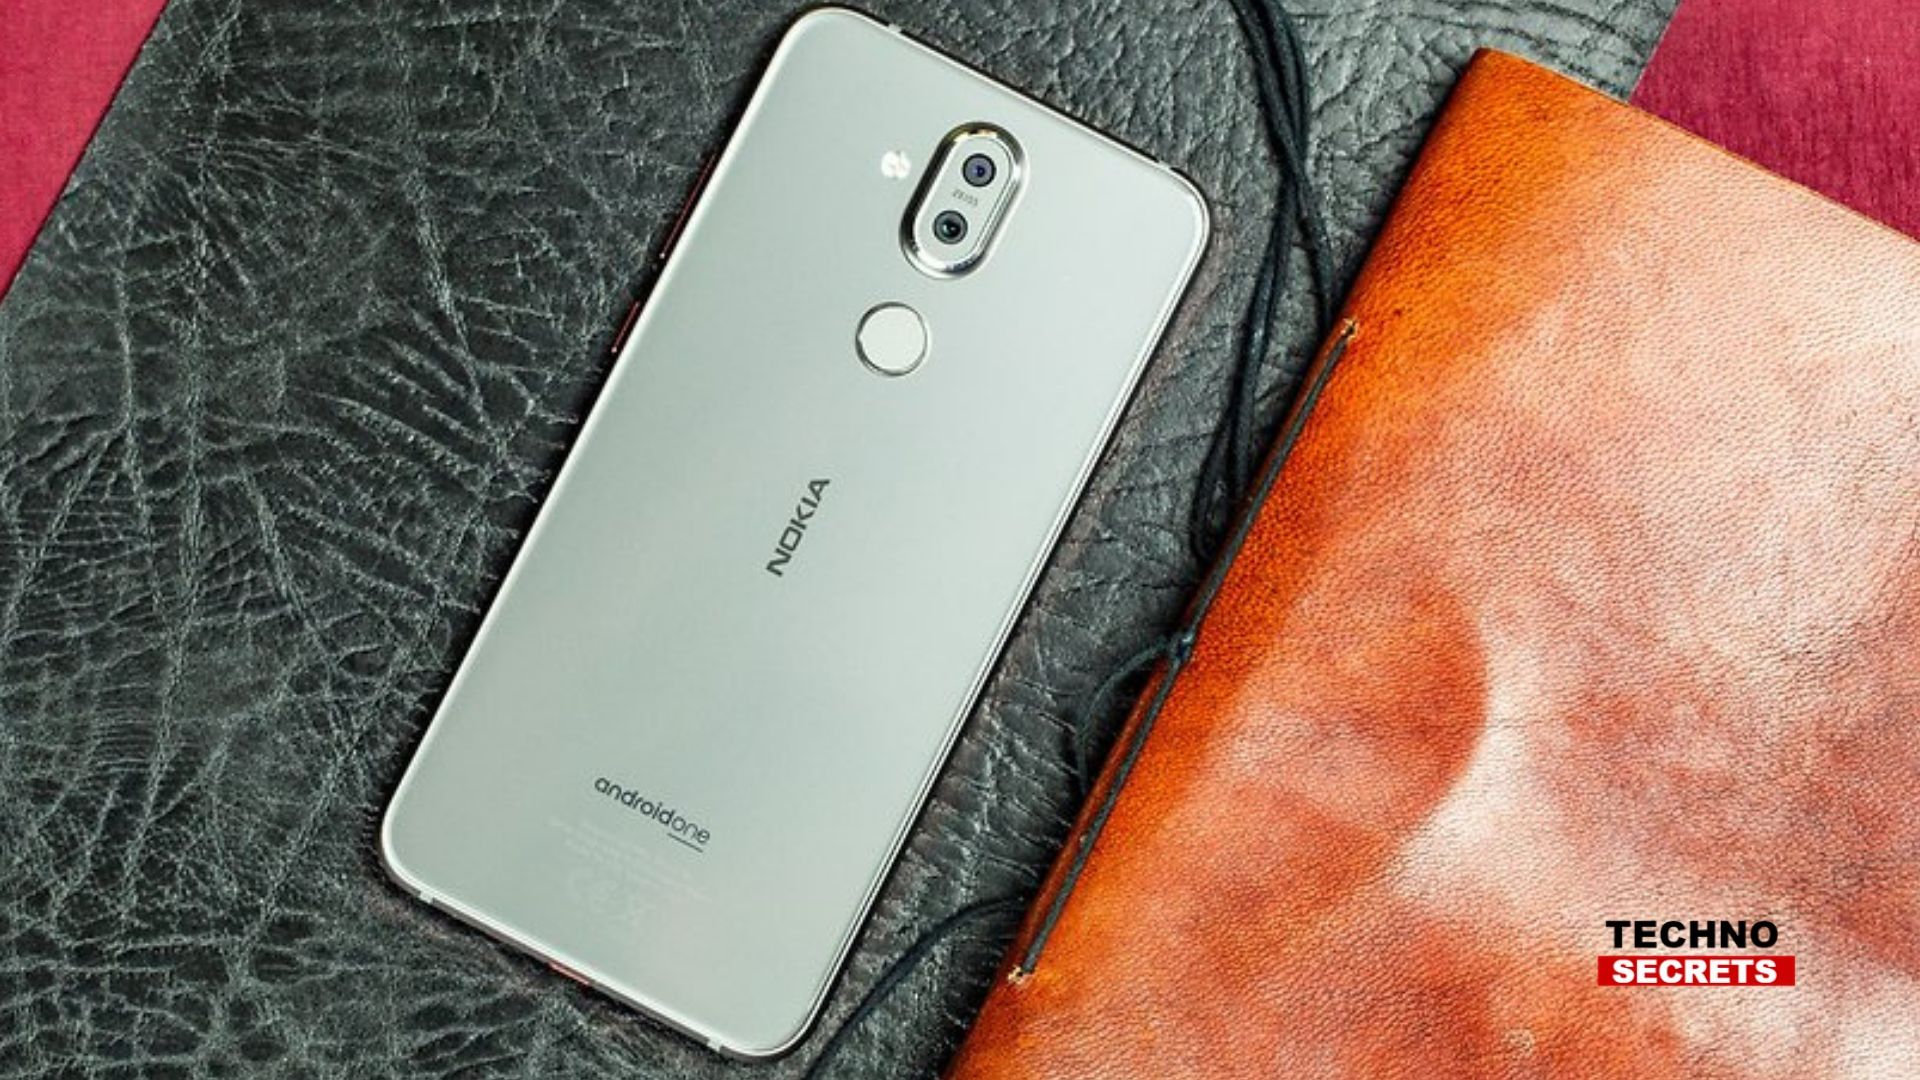 Nokia 8.1, Nokia 7.1, Nokia 6.1 Get Discounts Up To Rs. 6,000 in India